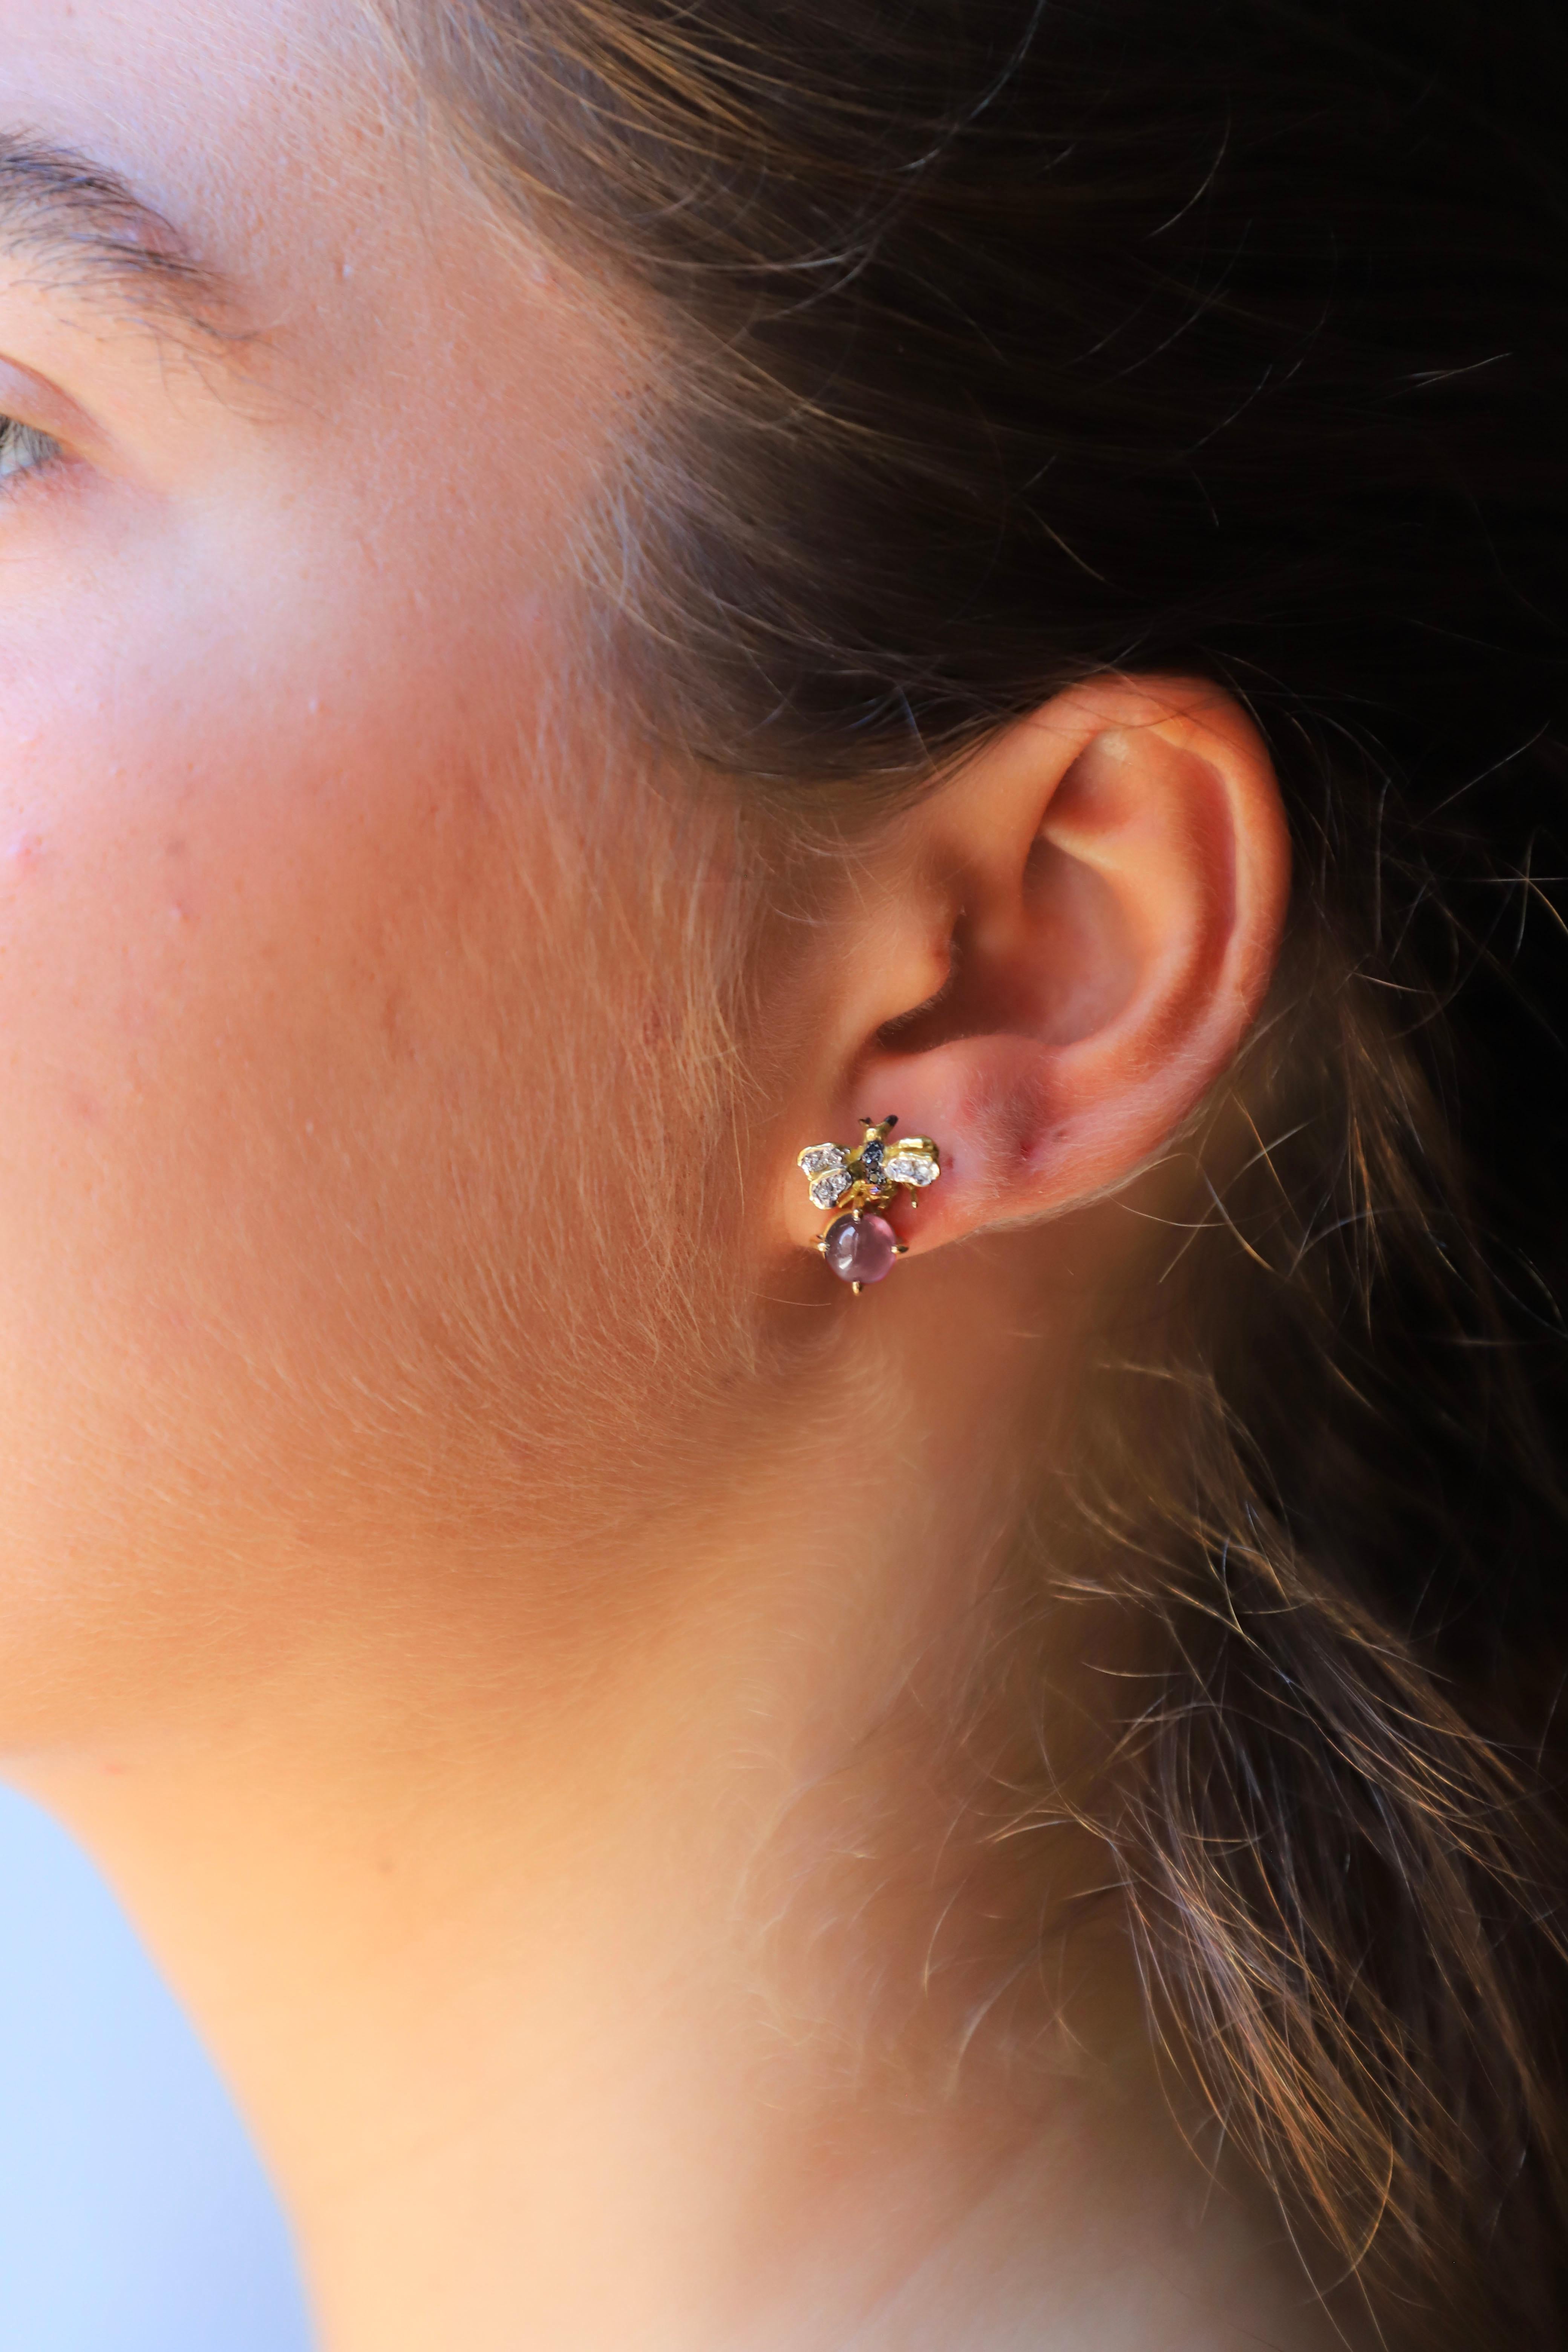 Discover elegance in its purest form with Rossella Ugolini's 18K Gold Little Bee Earrings, a testament to unparalleled artistry handcrafted in Italy using the ancient wax sculpture technique.

Dimension: 0.59 in   (1,5 cm) x. 0.51 in  ( 1,3 cm)
A